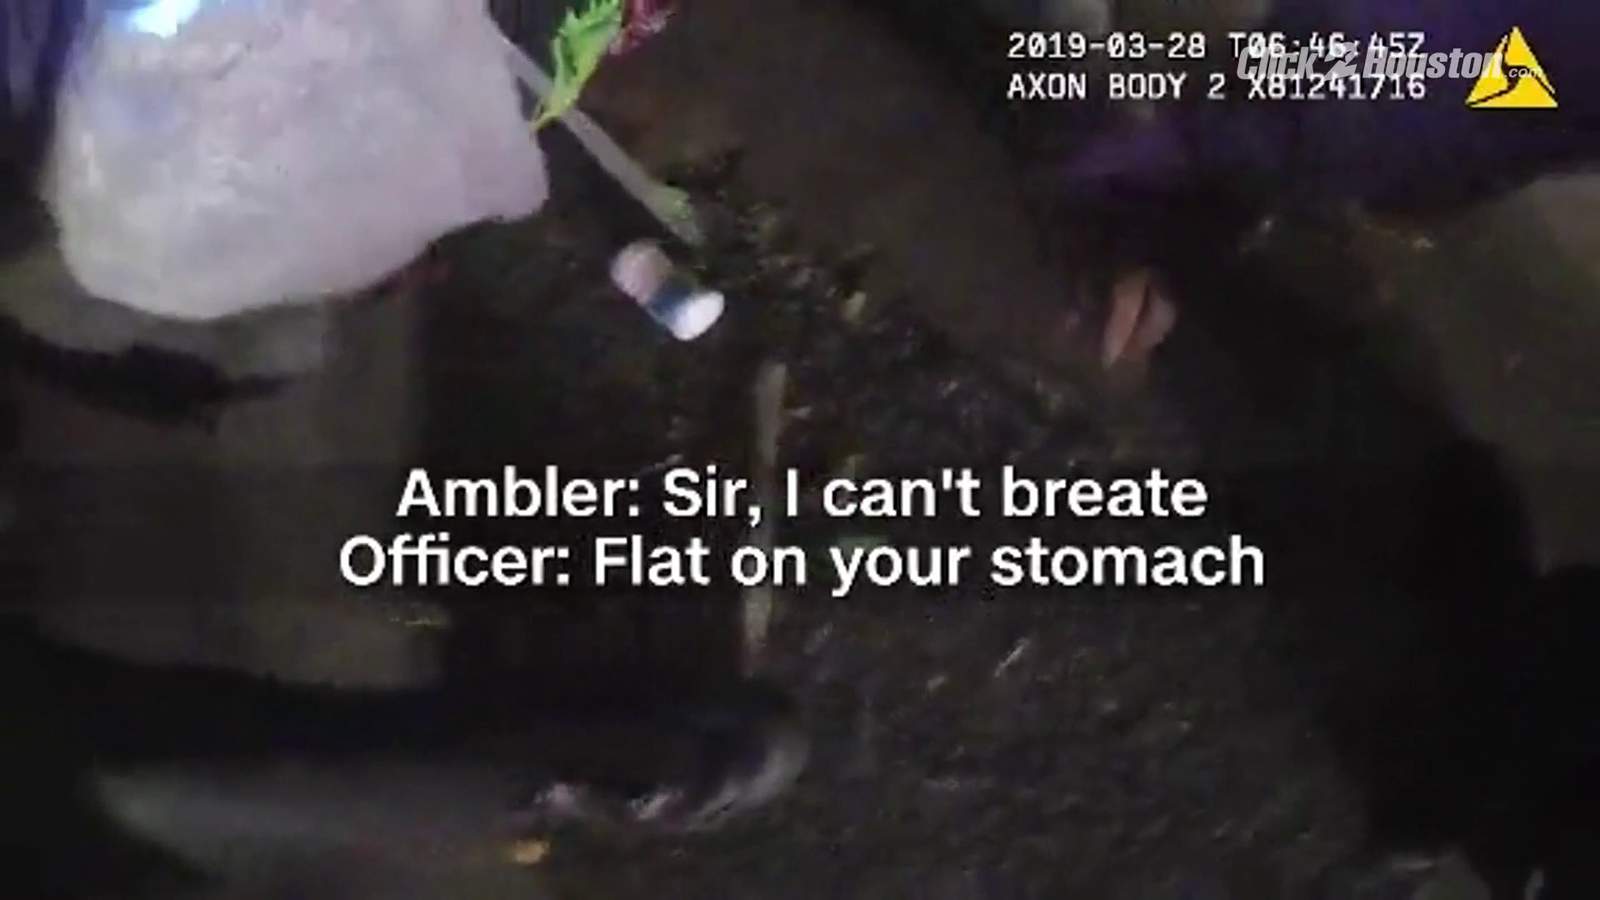 Black man heard saying I cant breathe multiple times during fatal arrest in Texas, body camera video shows